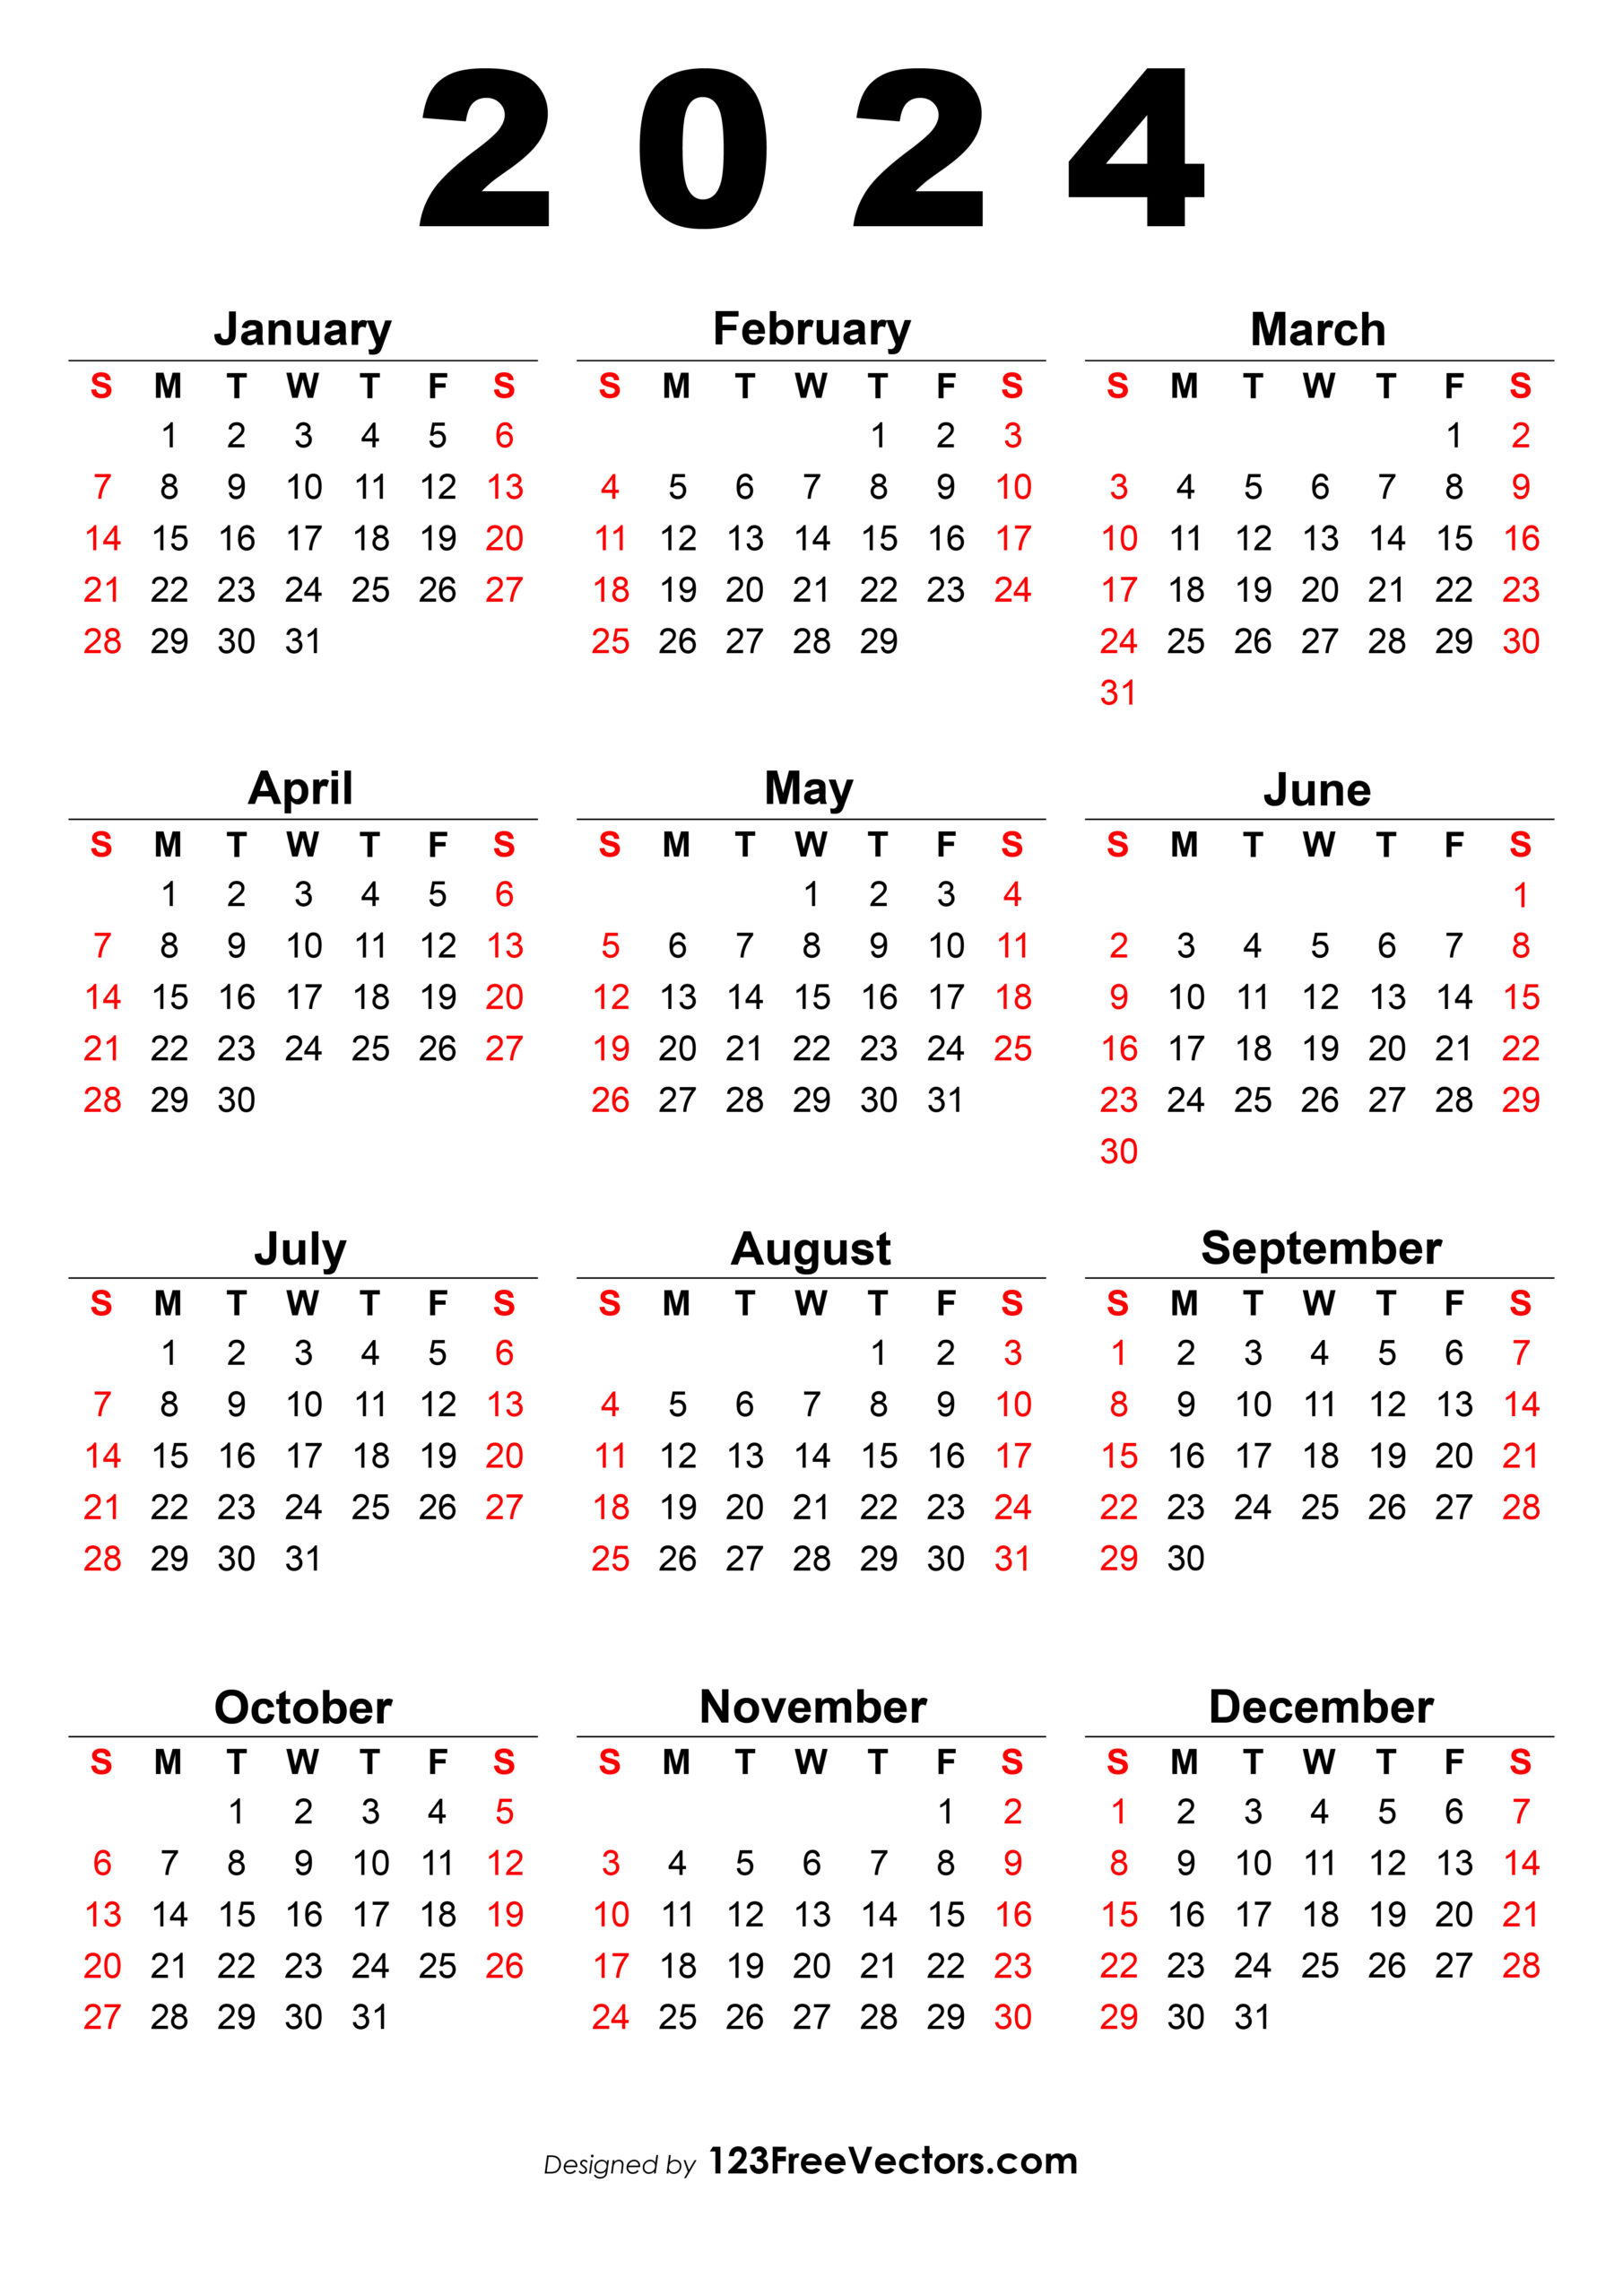 Free 2024 Calendar One Page | Free 2024 Yearly Calendar Printable One Page